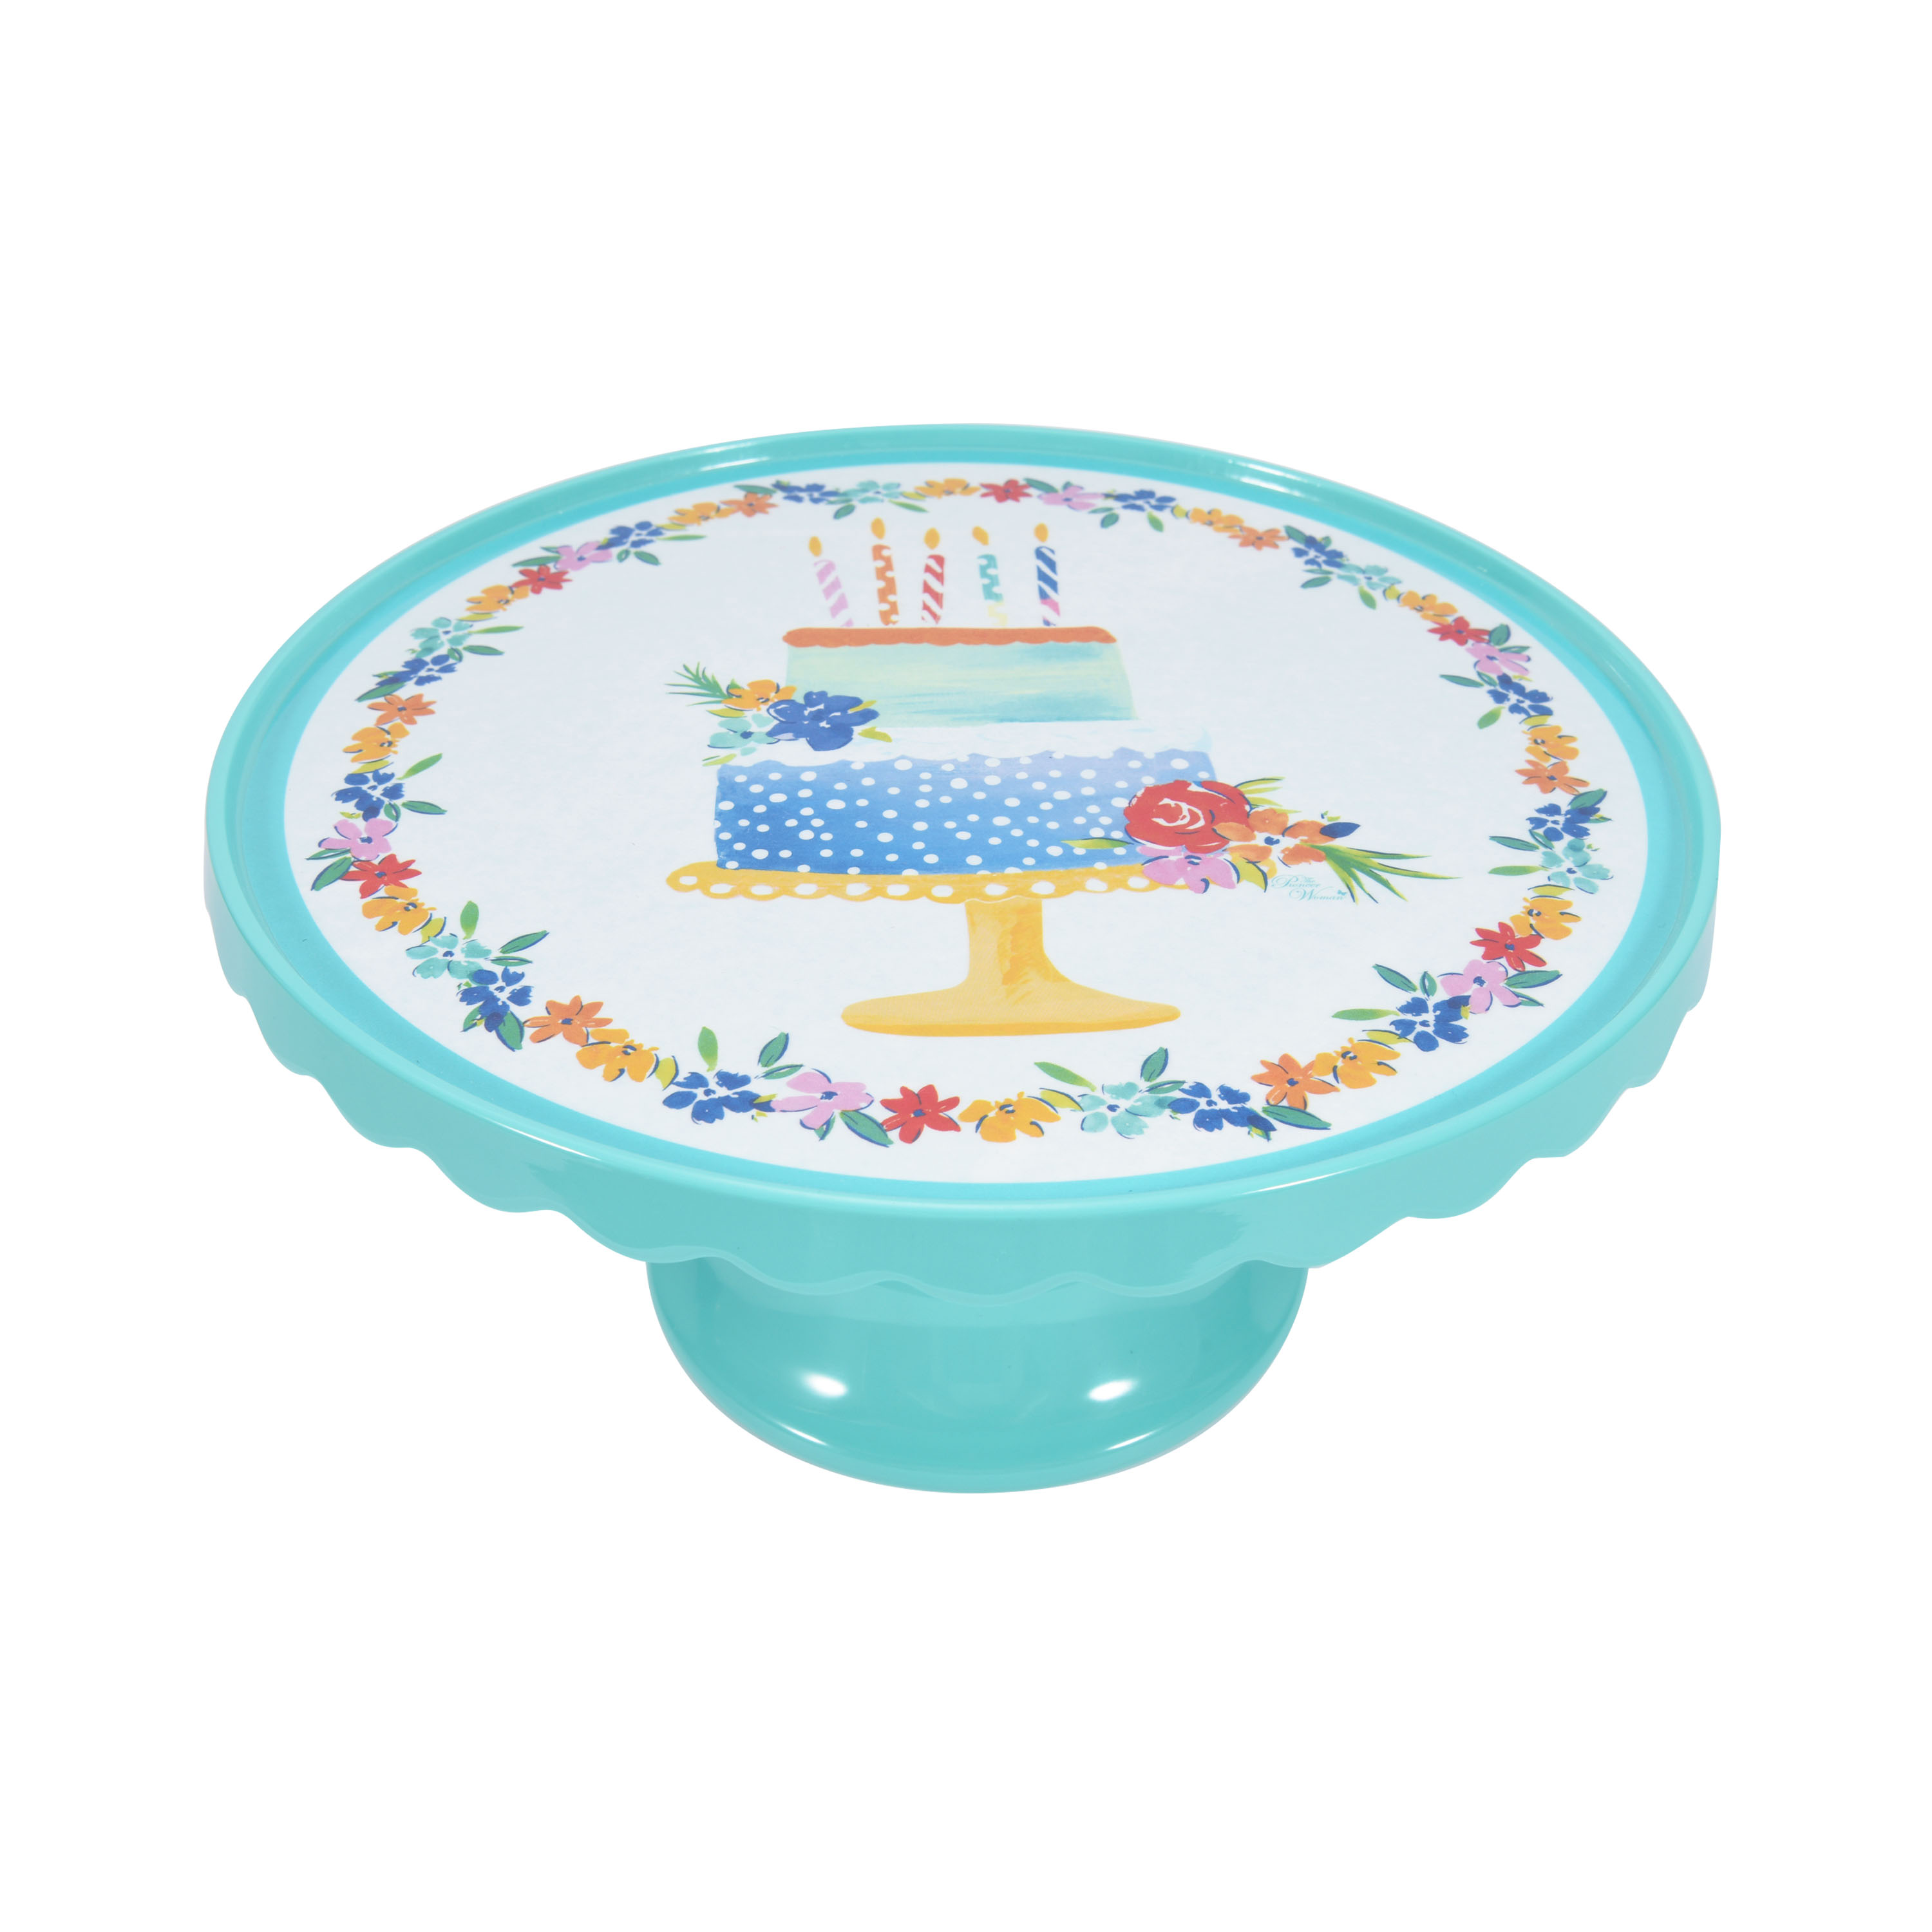 The Pioneer Woman 11-inch Cake Stand Assortment - image 4 of 4